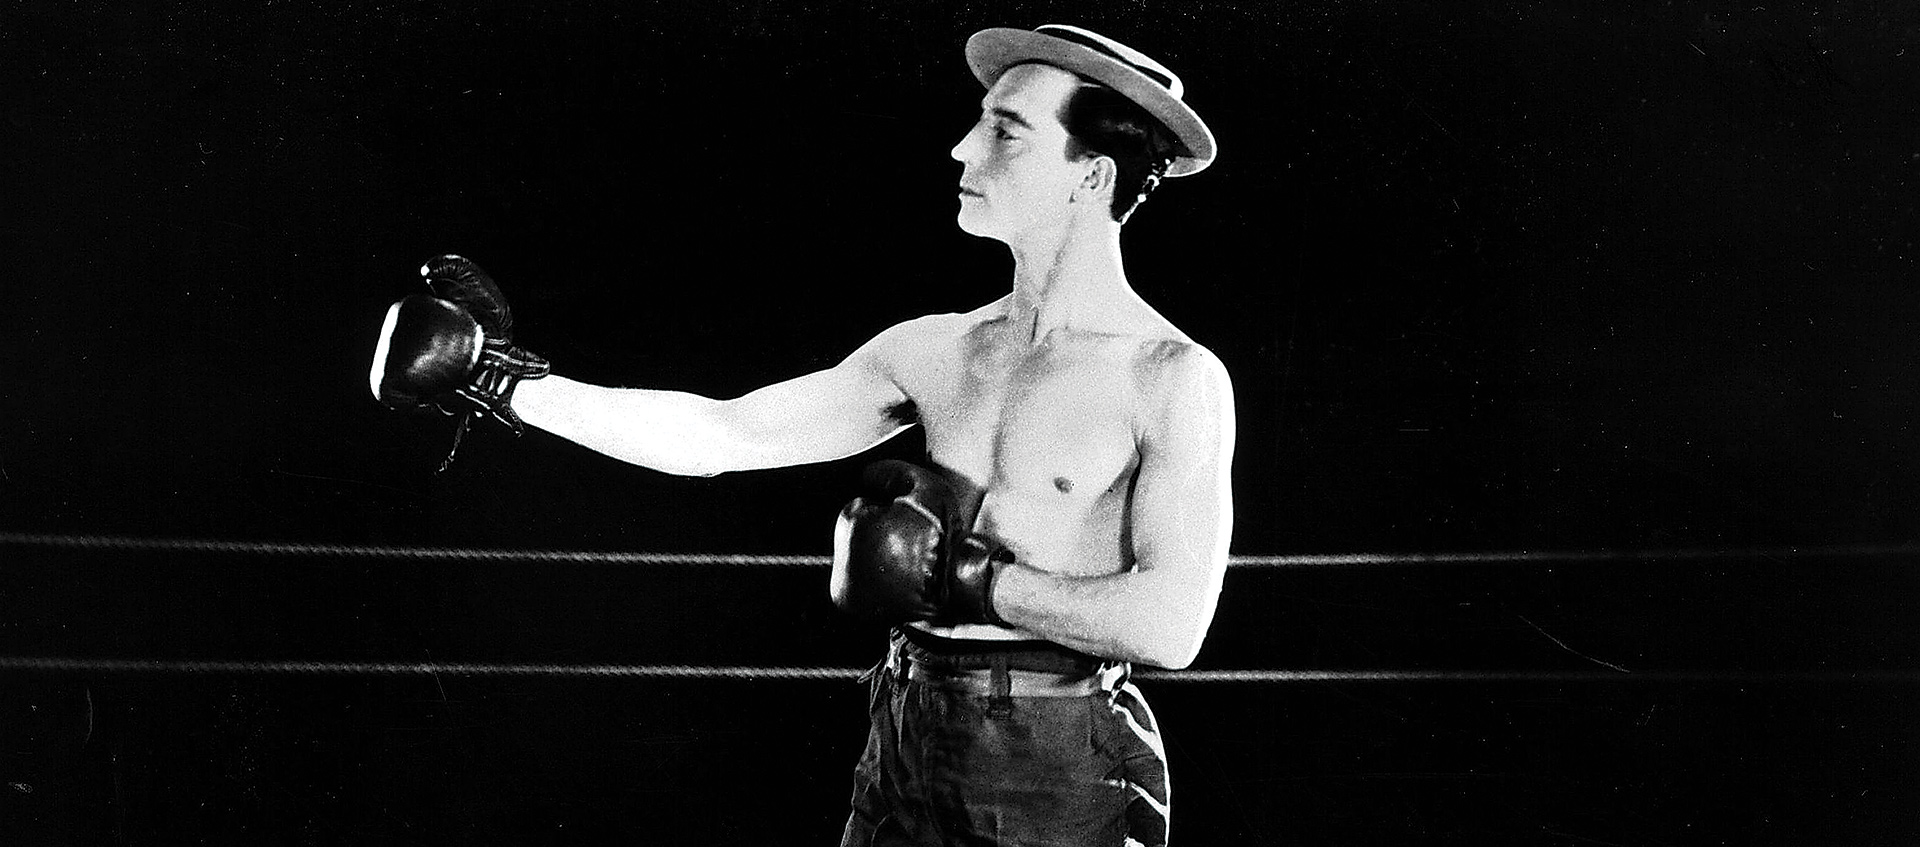 Man in hat poses with boxing gloves in a fighting stance